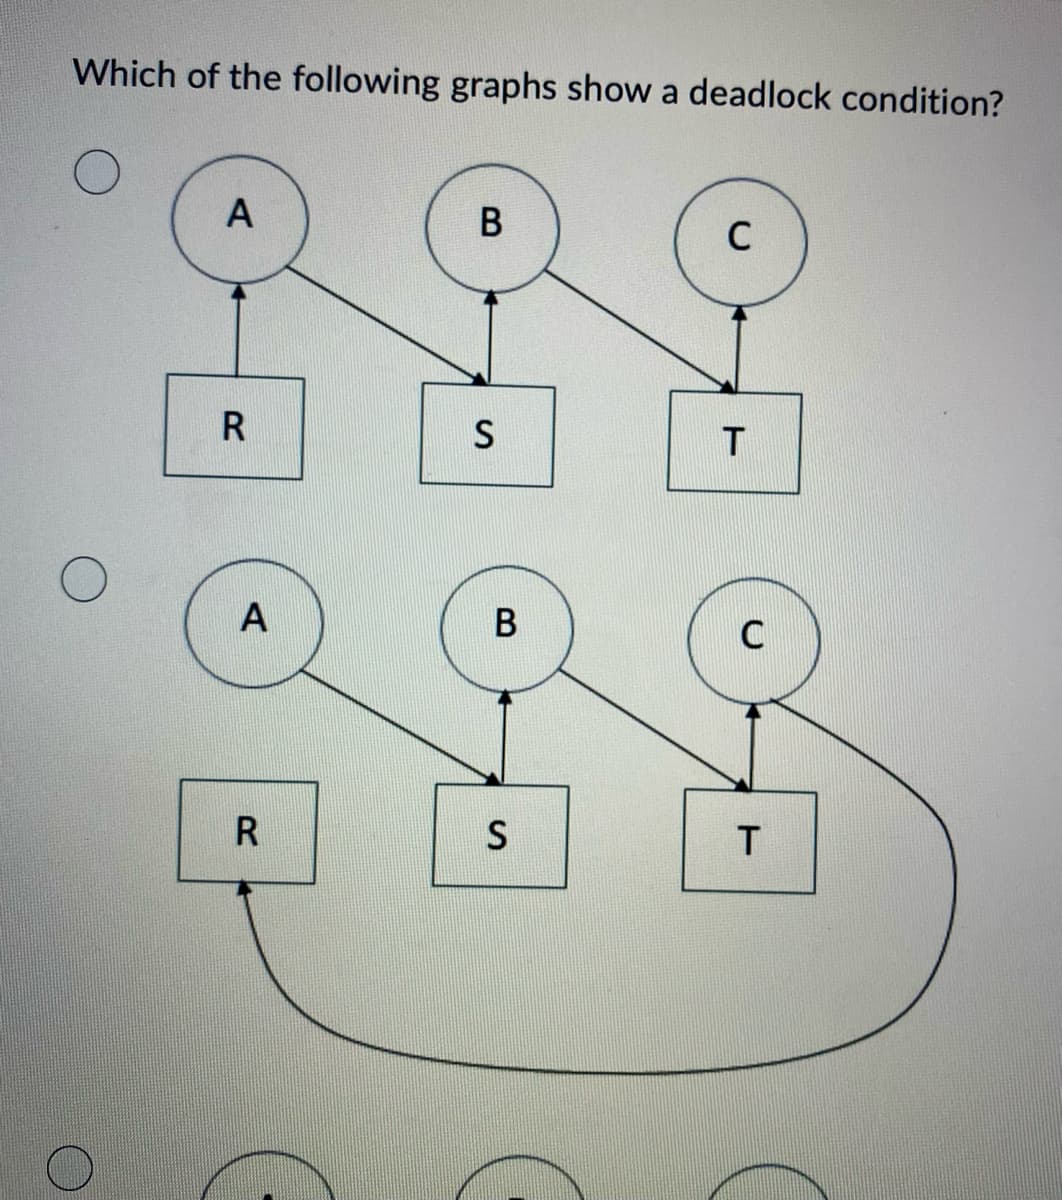 Which of the following graphs show a deadlock condition?
A
B
C
R
A
R
S
B
S
T
C
T